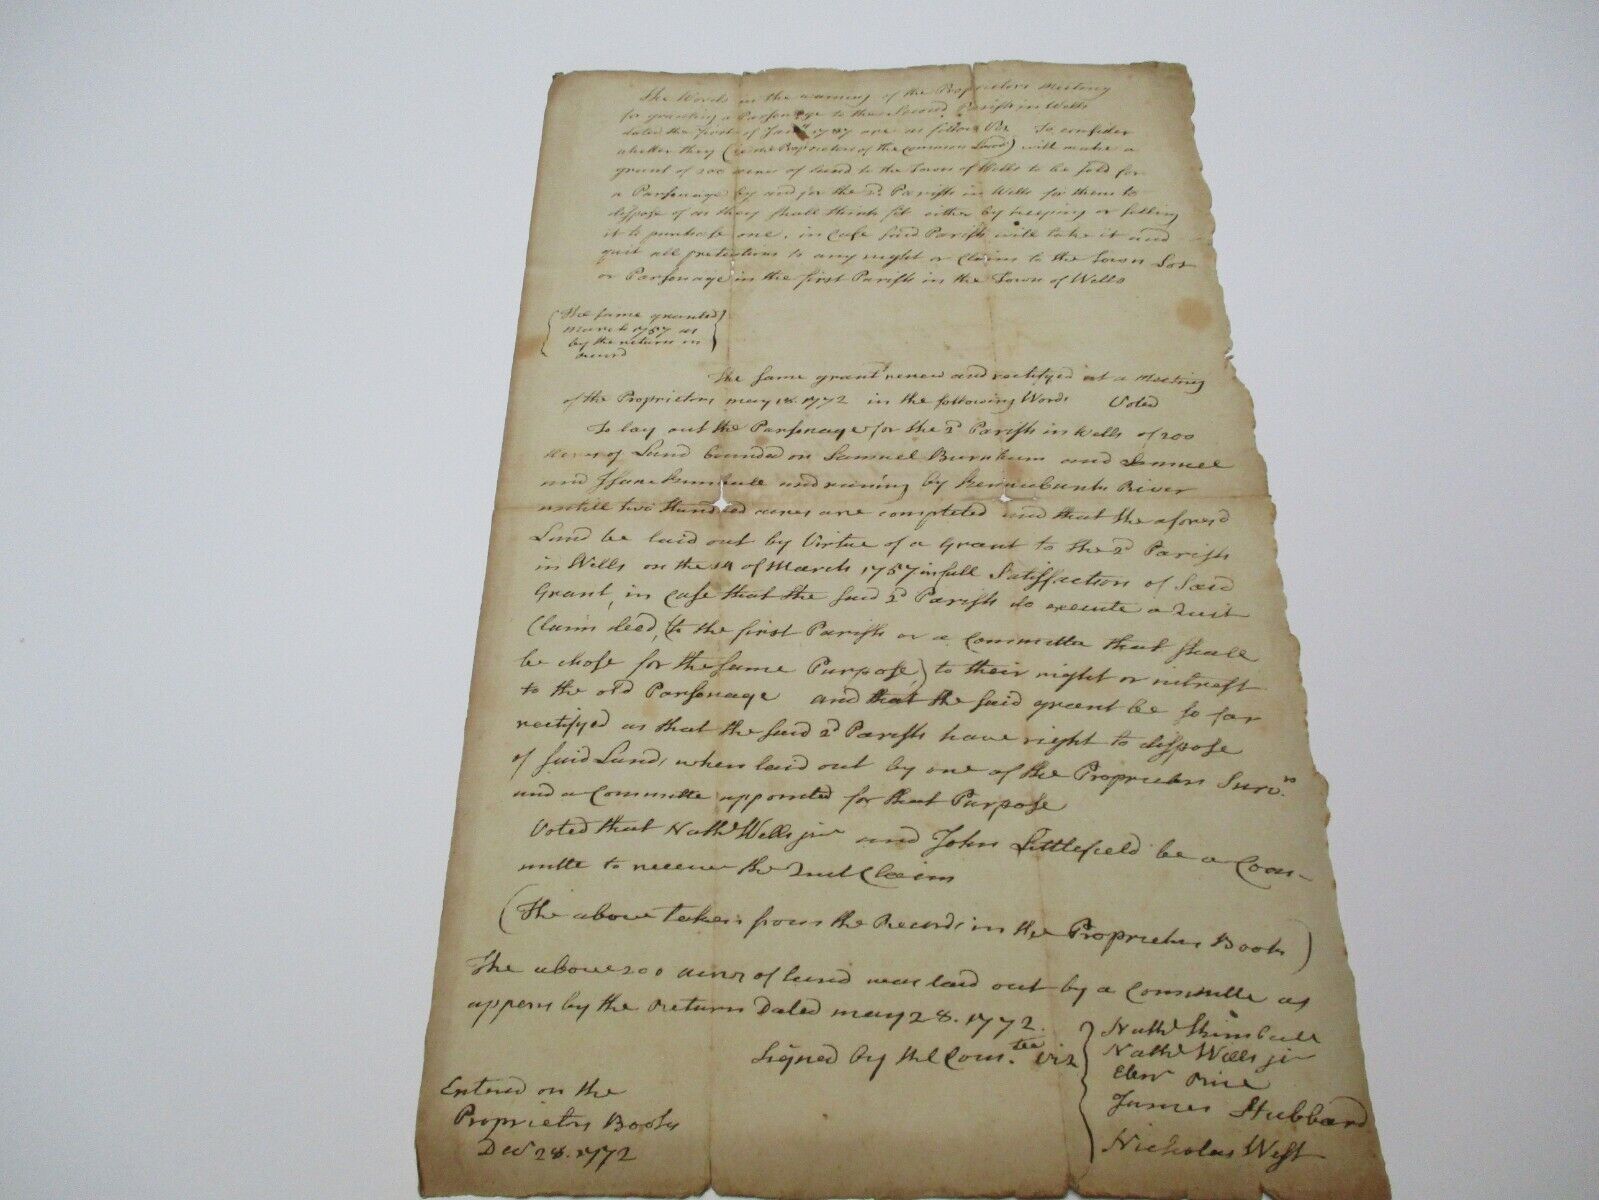 ANTIQUE EARLY AMERICAN WELLS MASSACHUSETTS DOCUMENT SIGNED 1772 ACRES OF LAND 